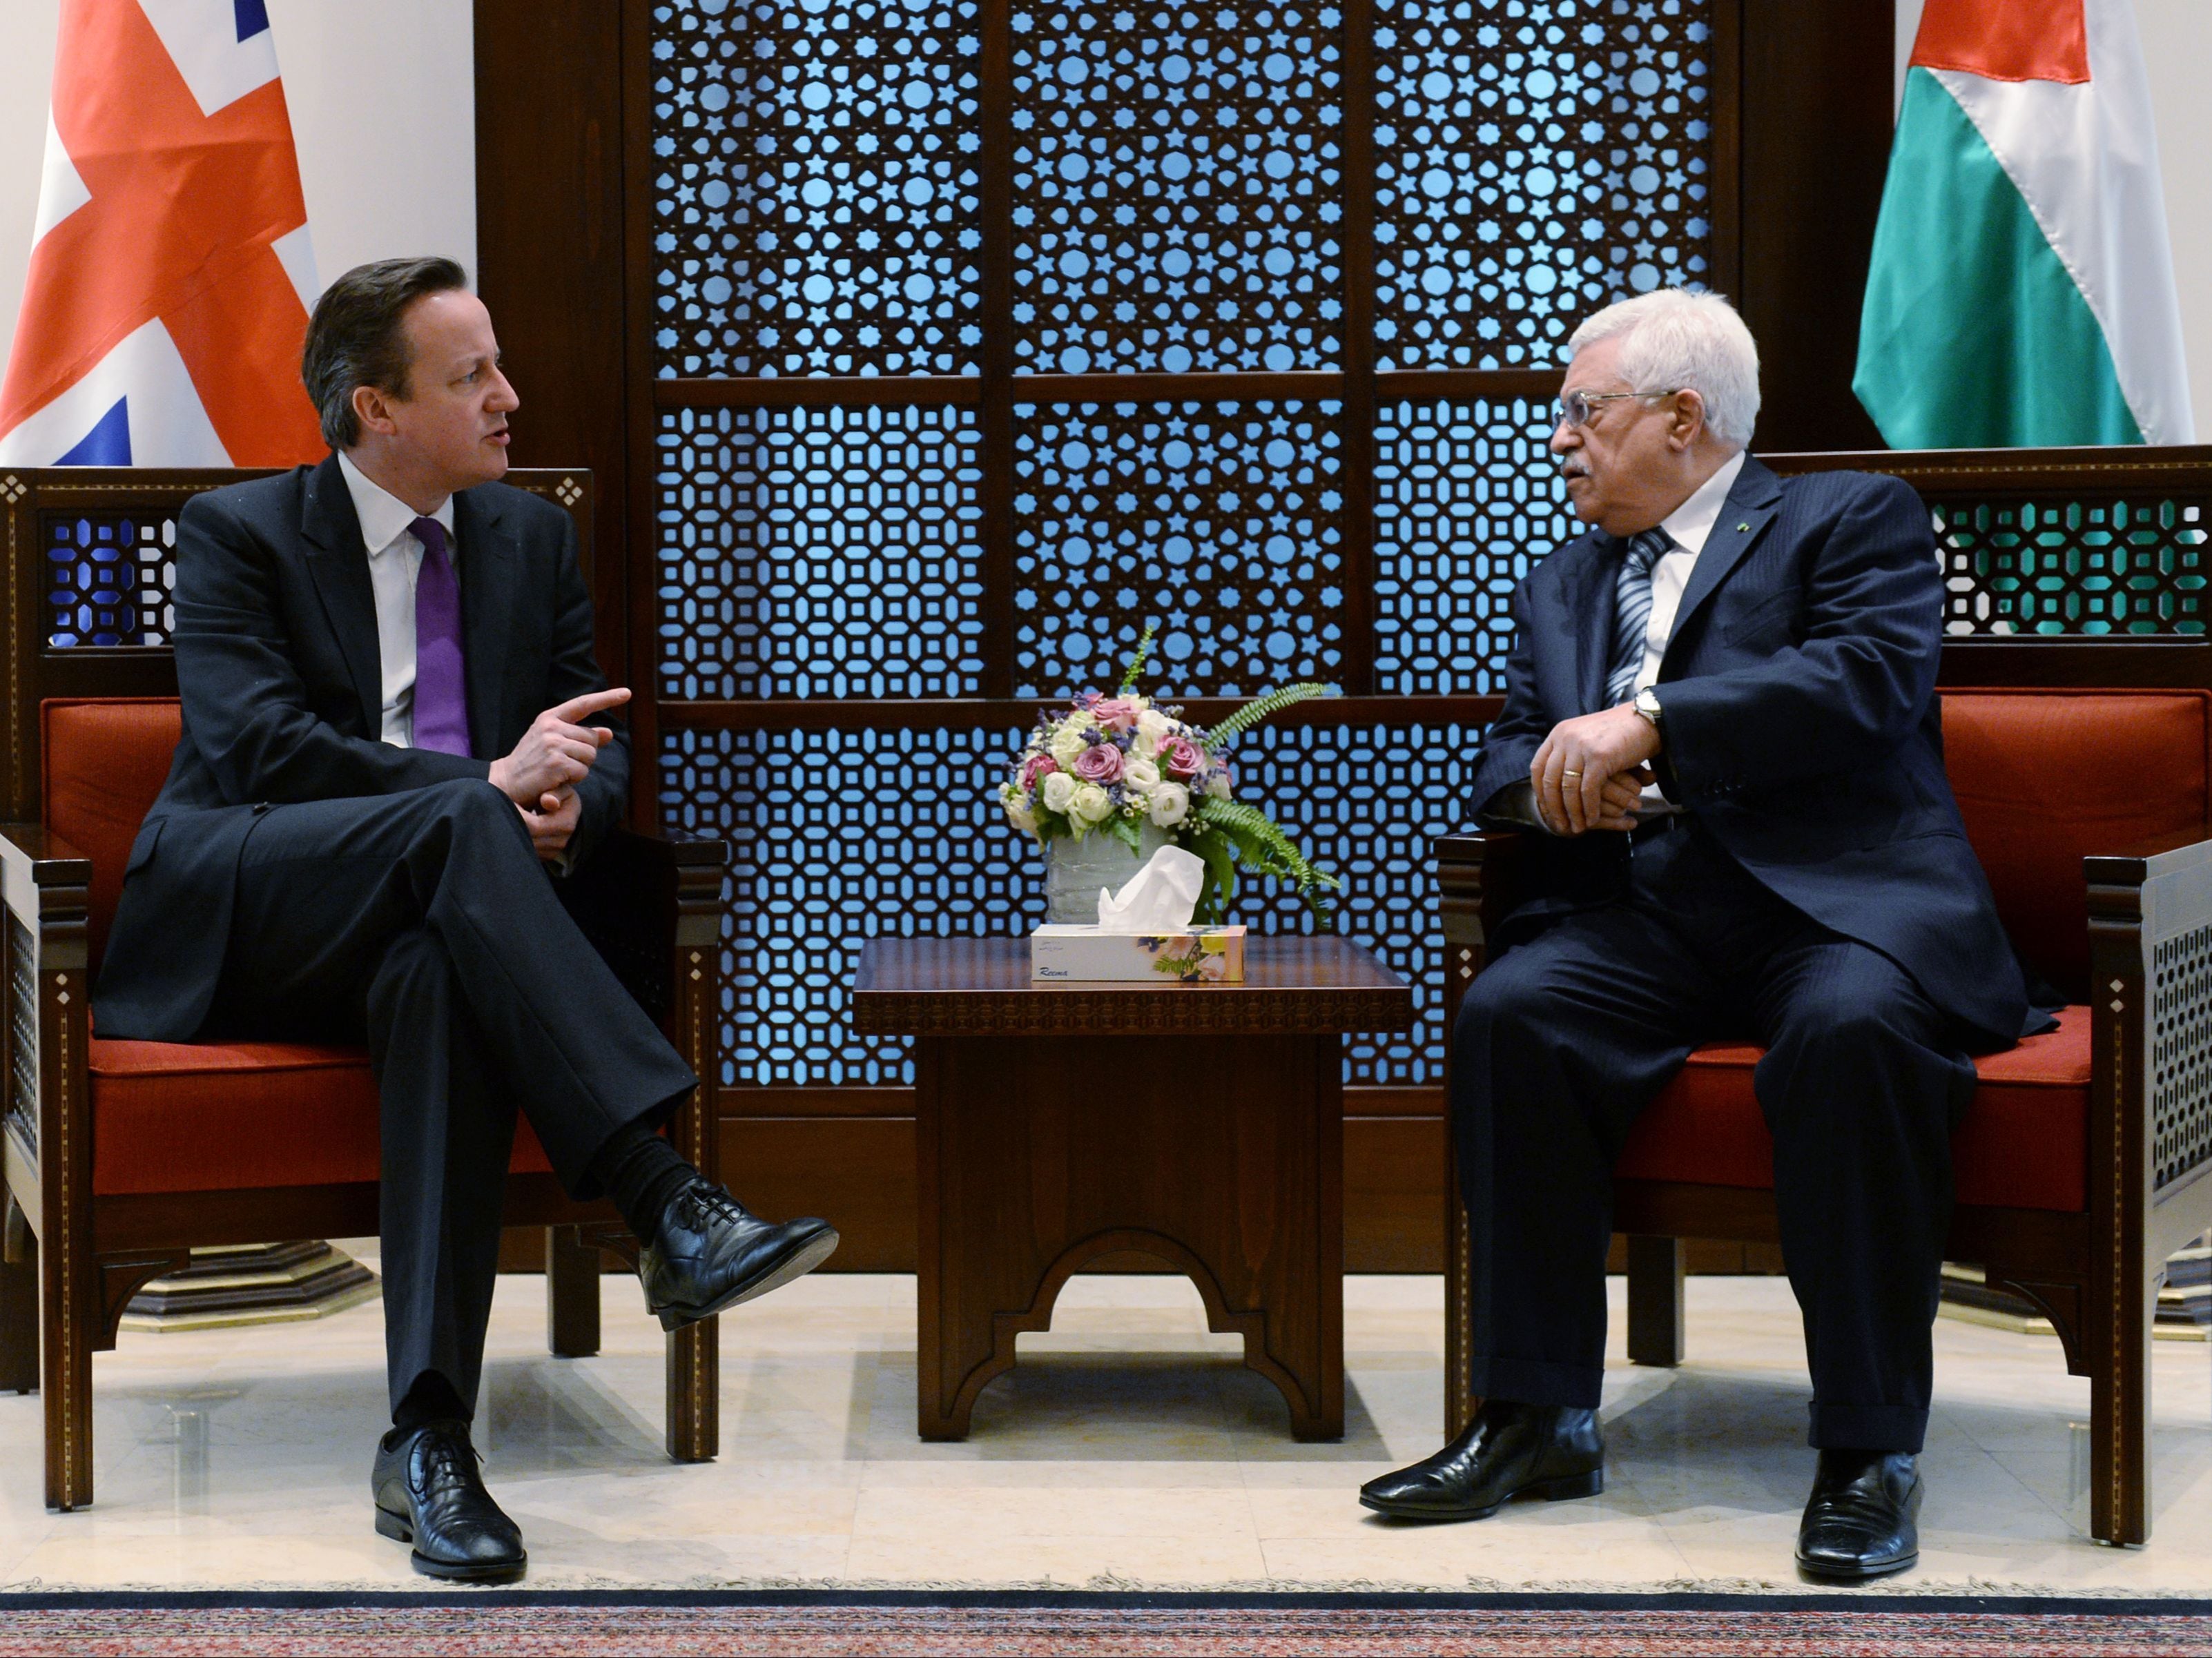 David Cameron talks with Palestinian president Mahmoud Abbas during trip to Middle East in 2014